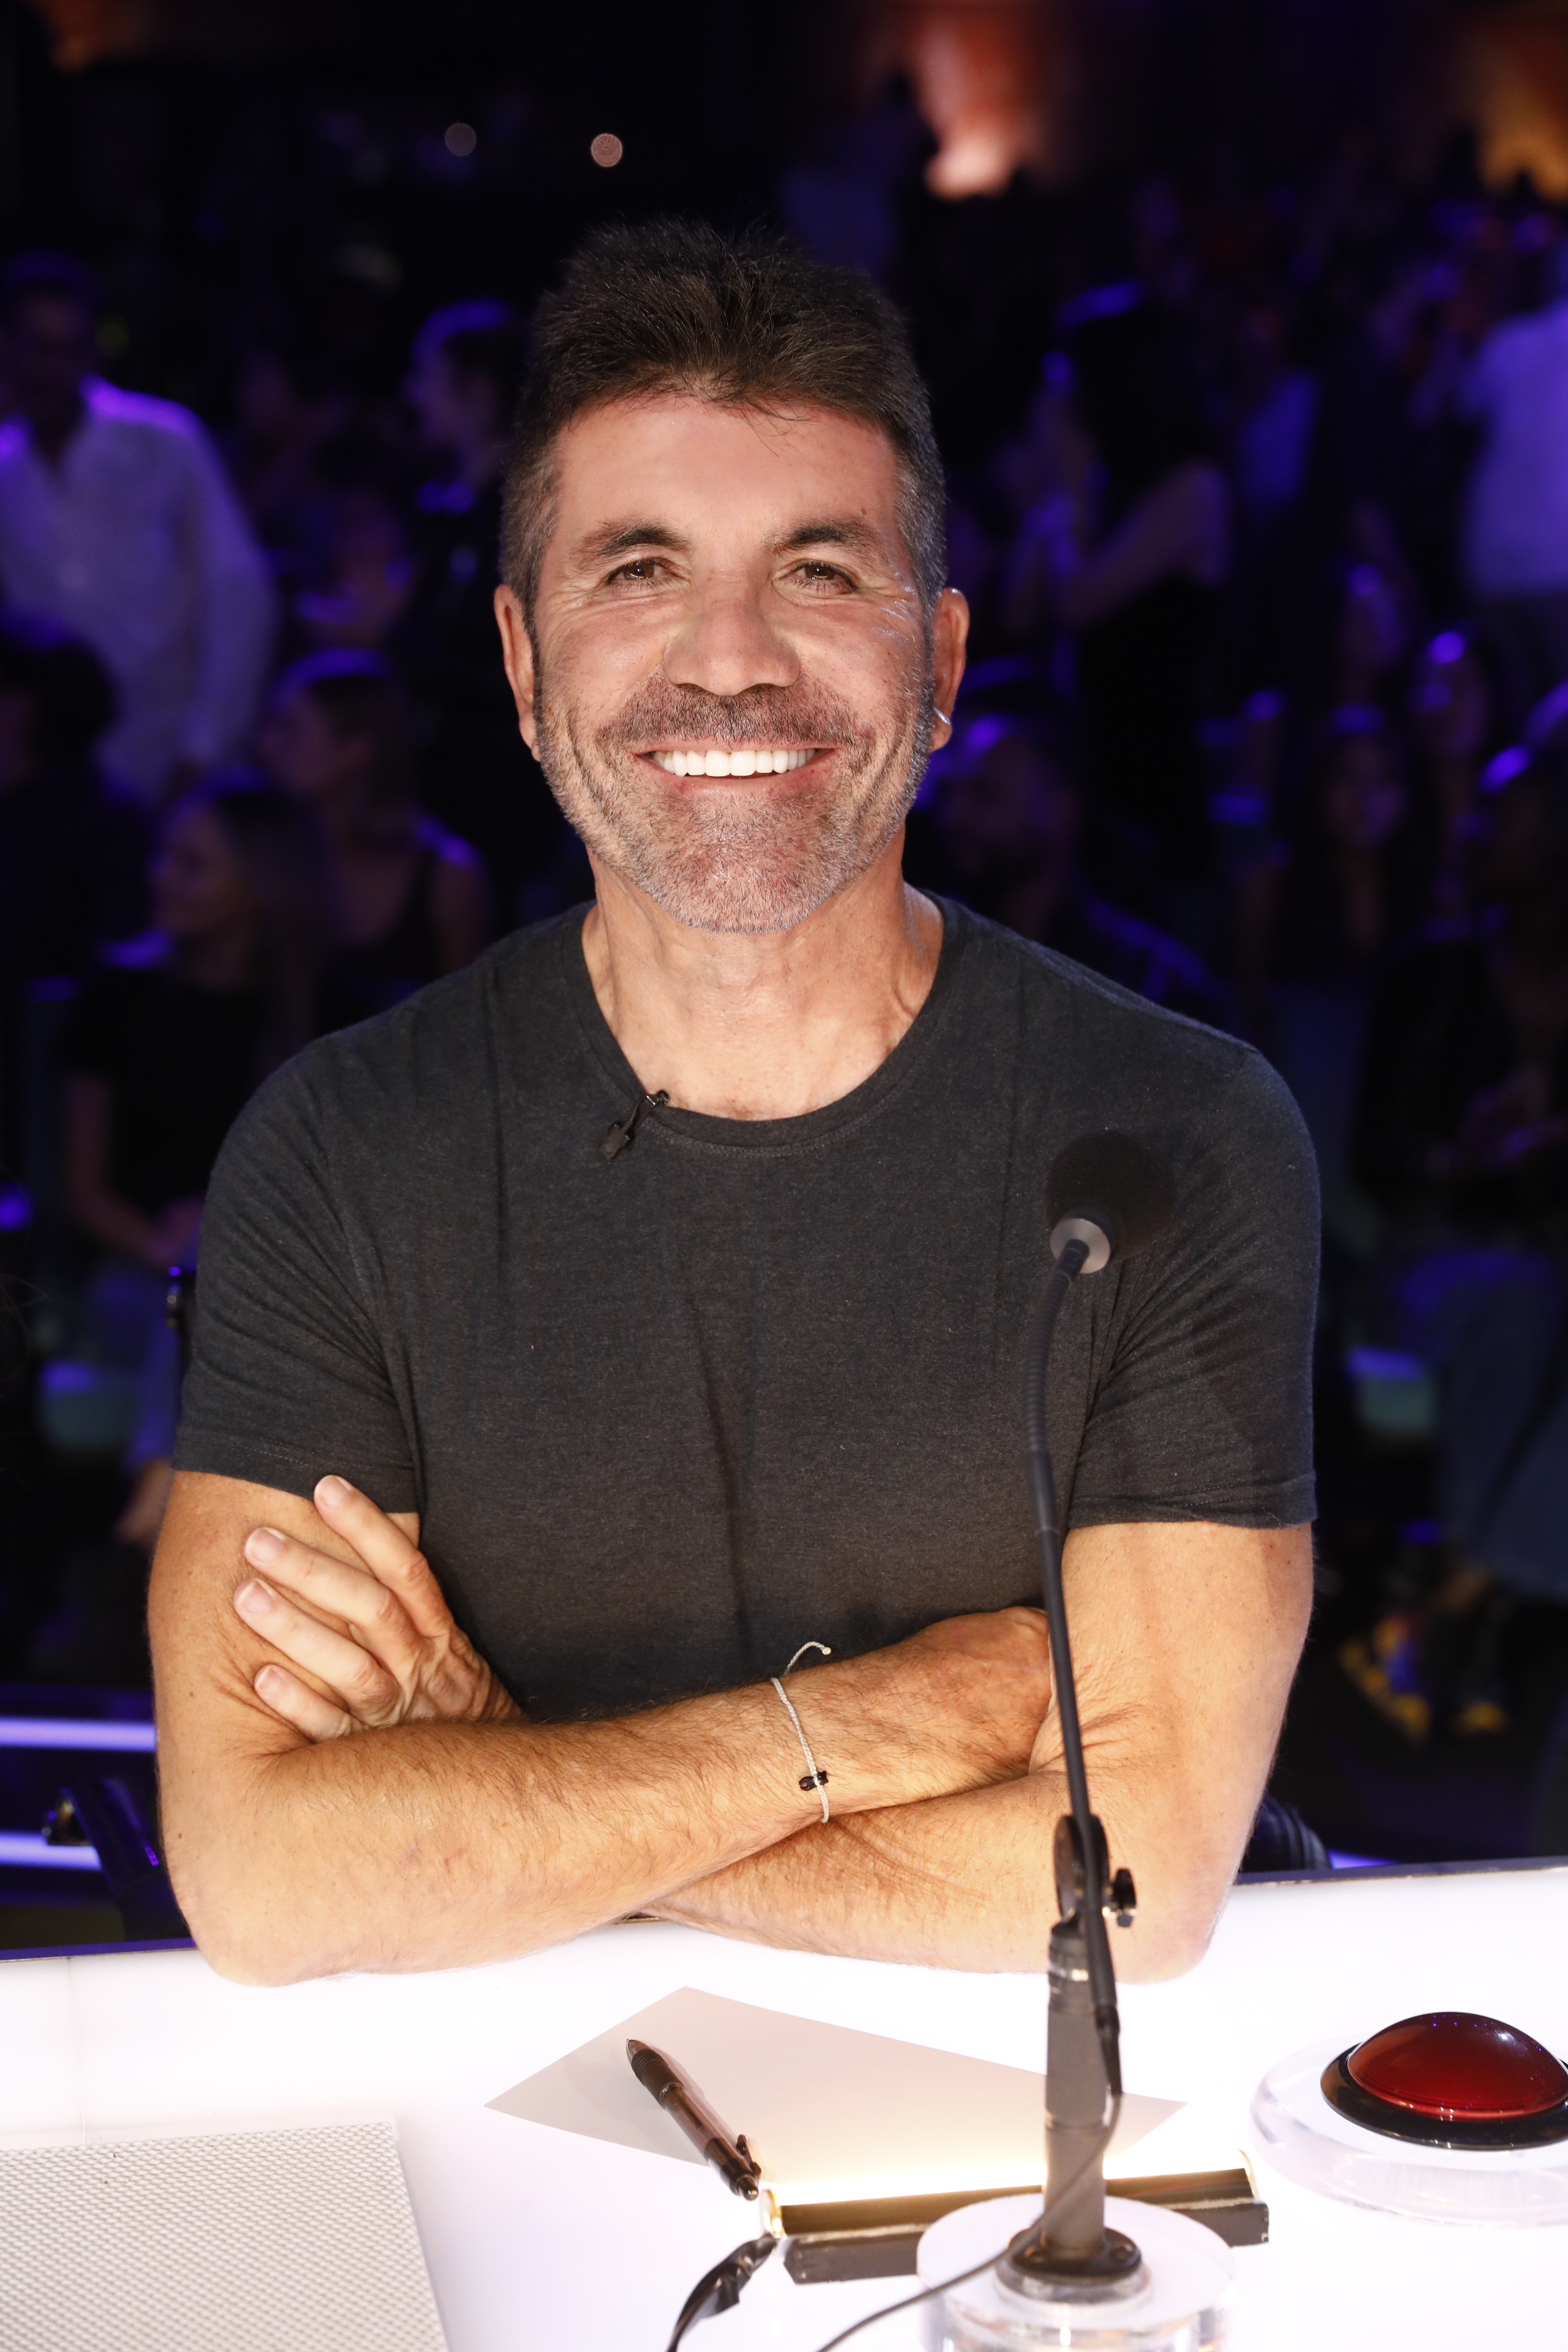 Simon Cowell during quarterfinals episode of "America's Got Talent" in 2022 | Source: Getty Images